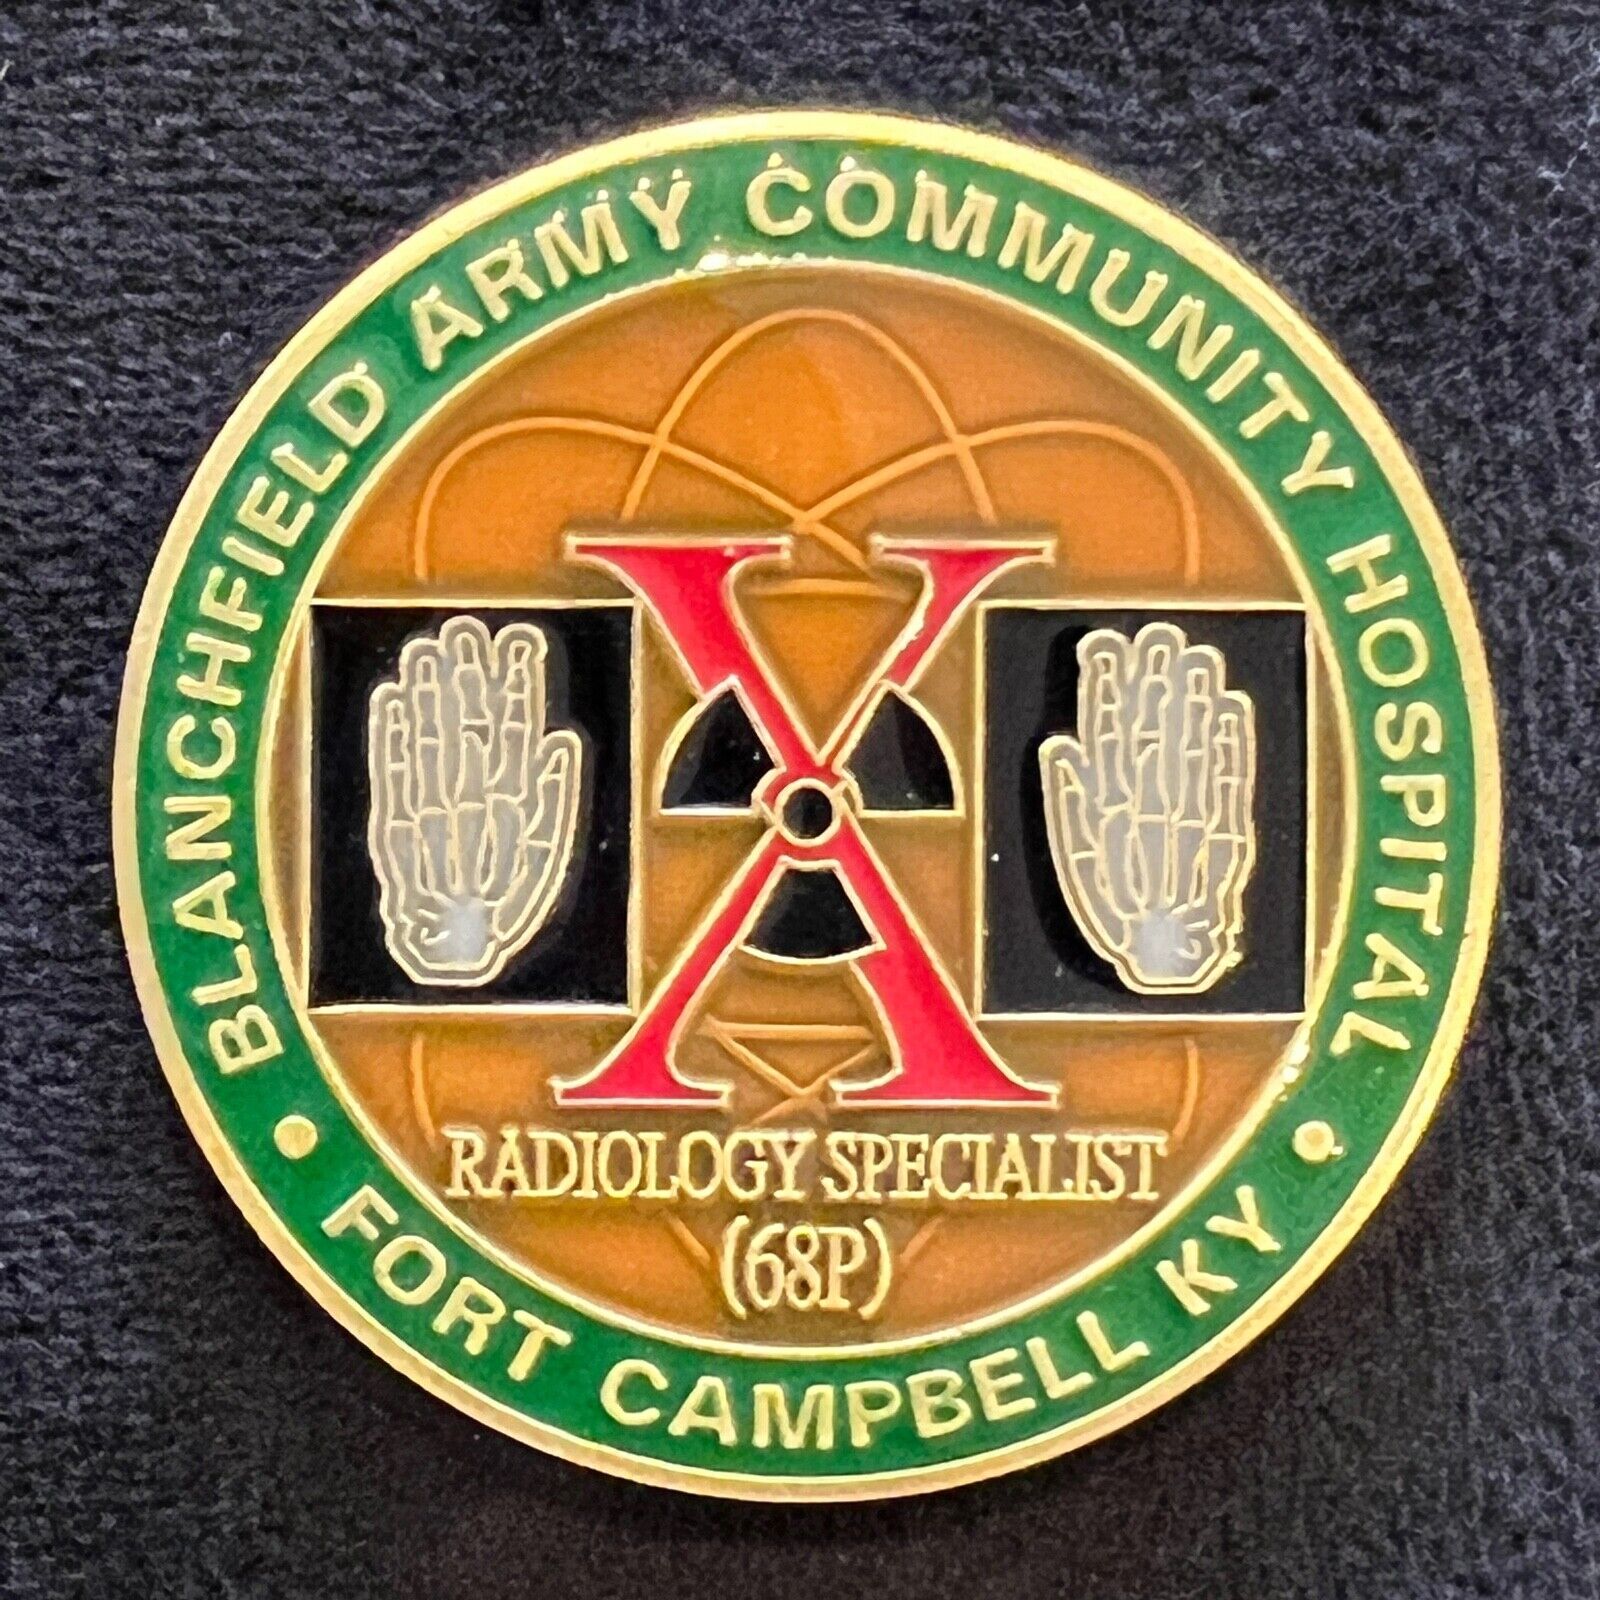 Blanchfield Army Community Hospital Radiology Specialist 68P Challenge Coin